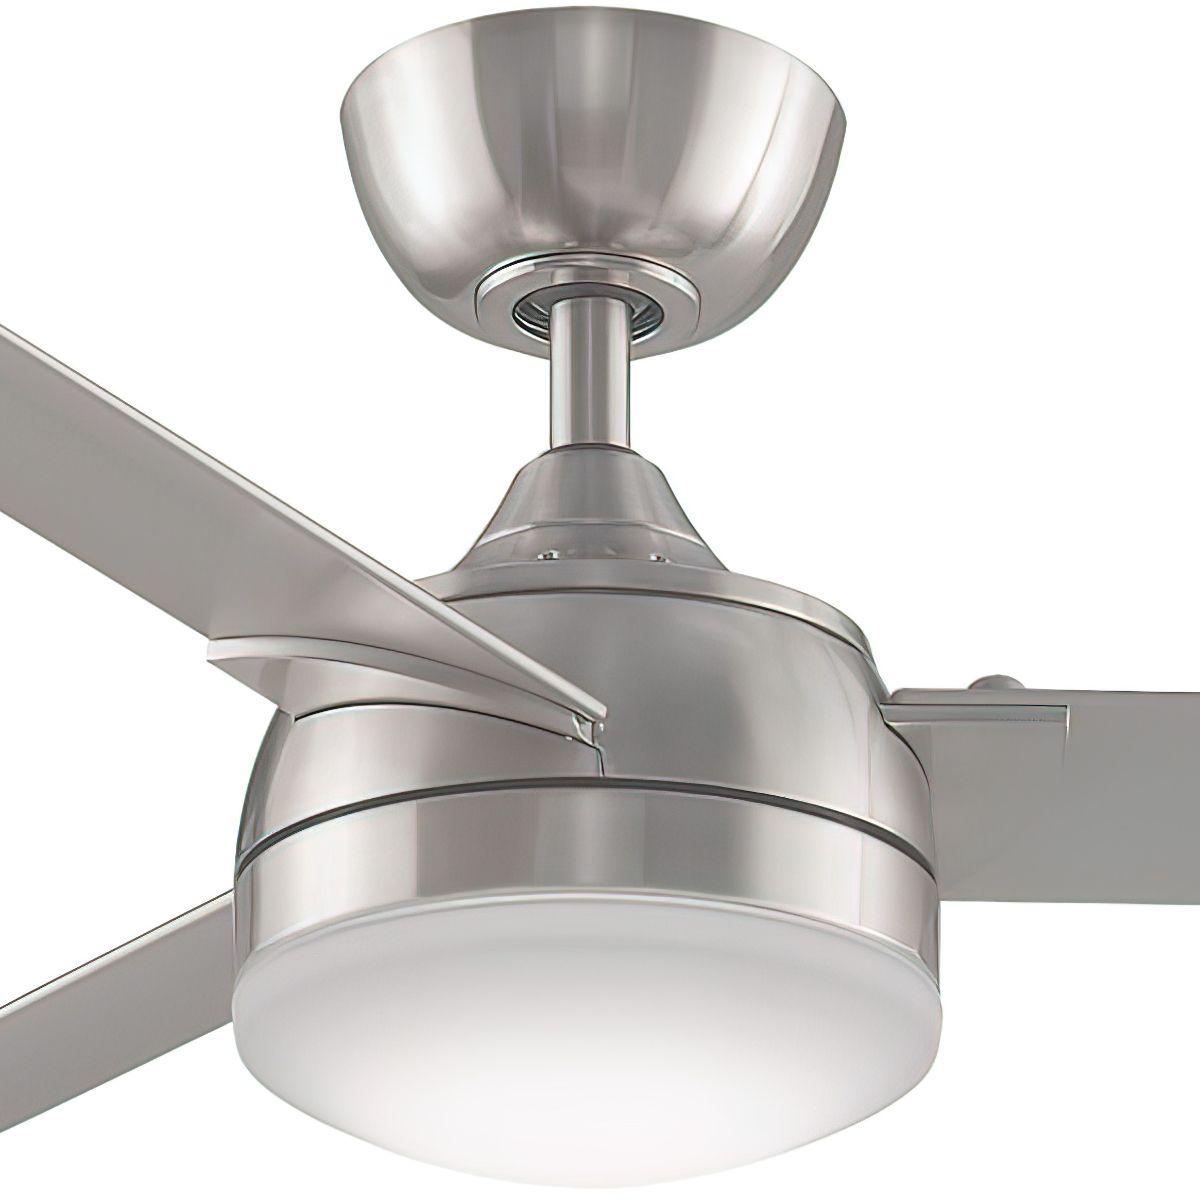 Xeno 56 Inch Large Modern Indoor/Outdoor Ceiling Fan With Light And Remote, Brushed Nickel Finish